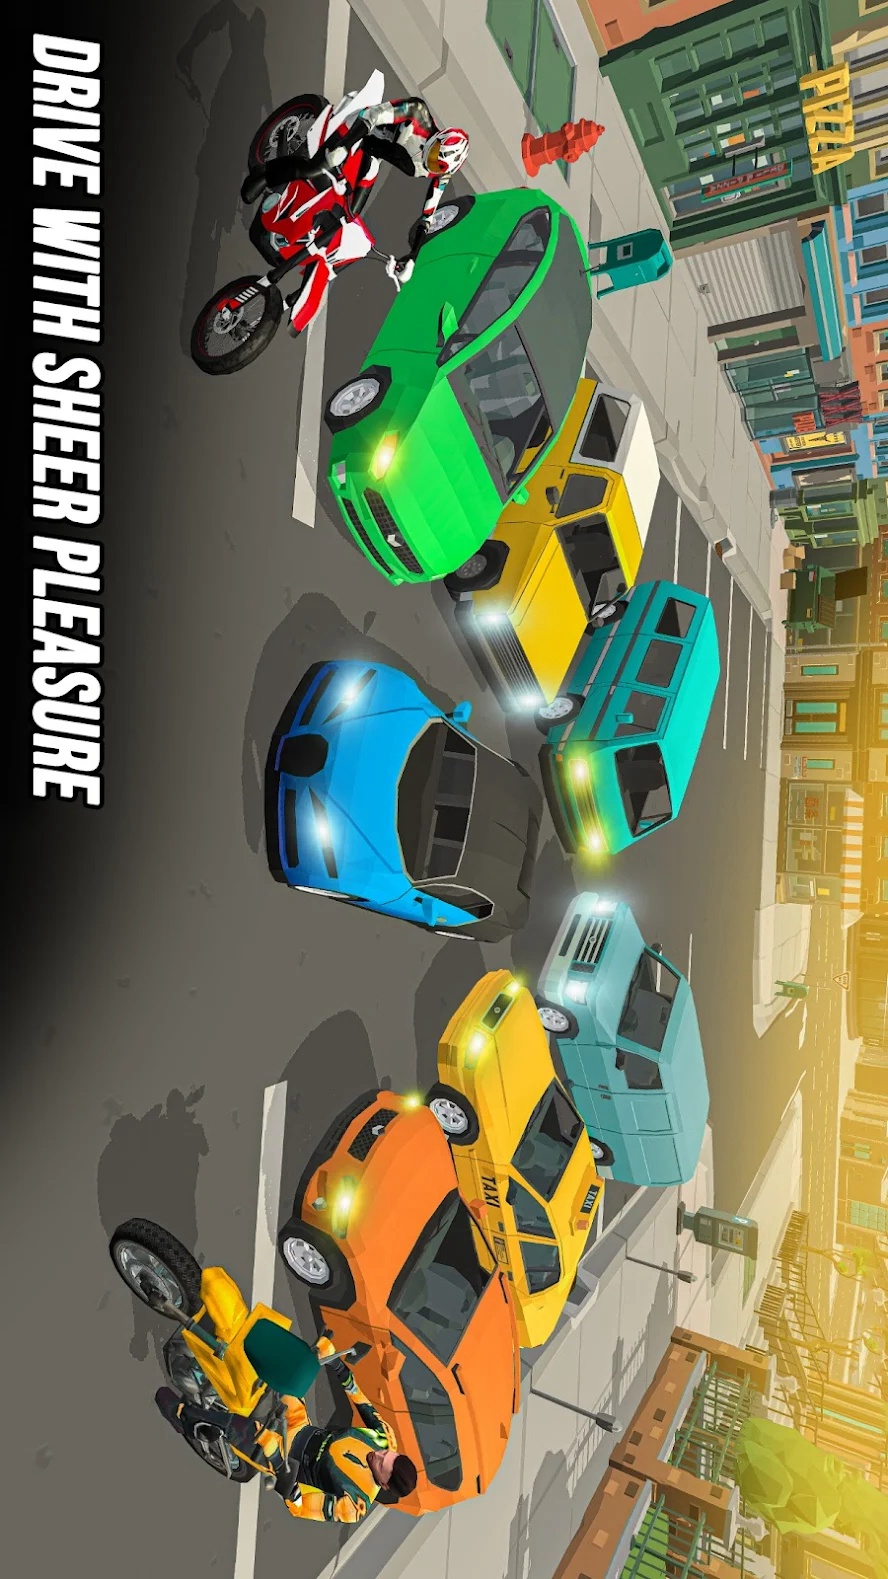 Chasing Fever Car Chase Games